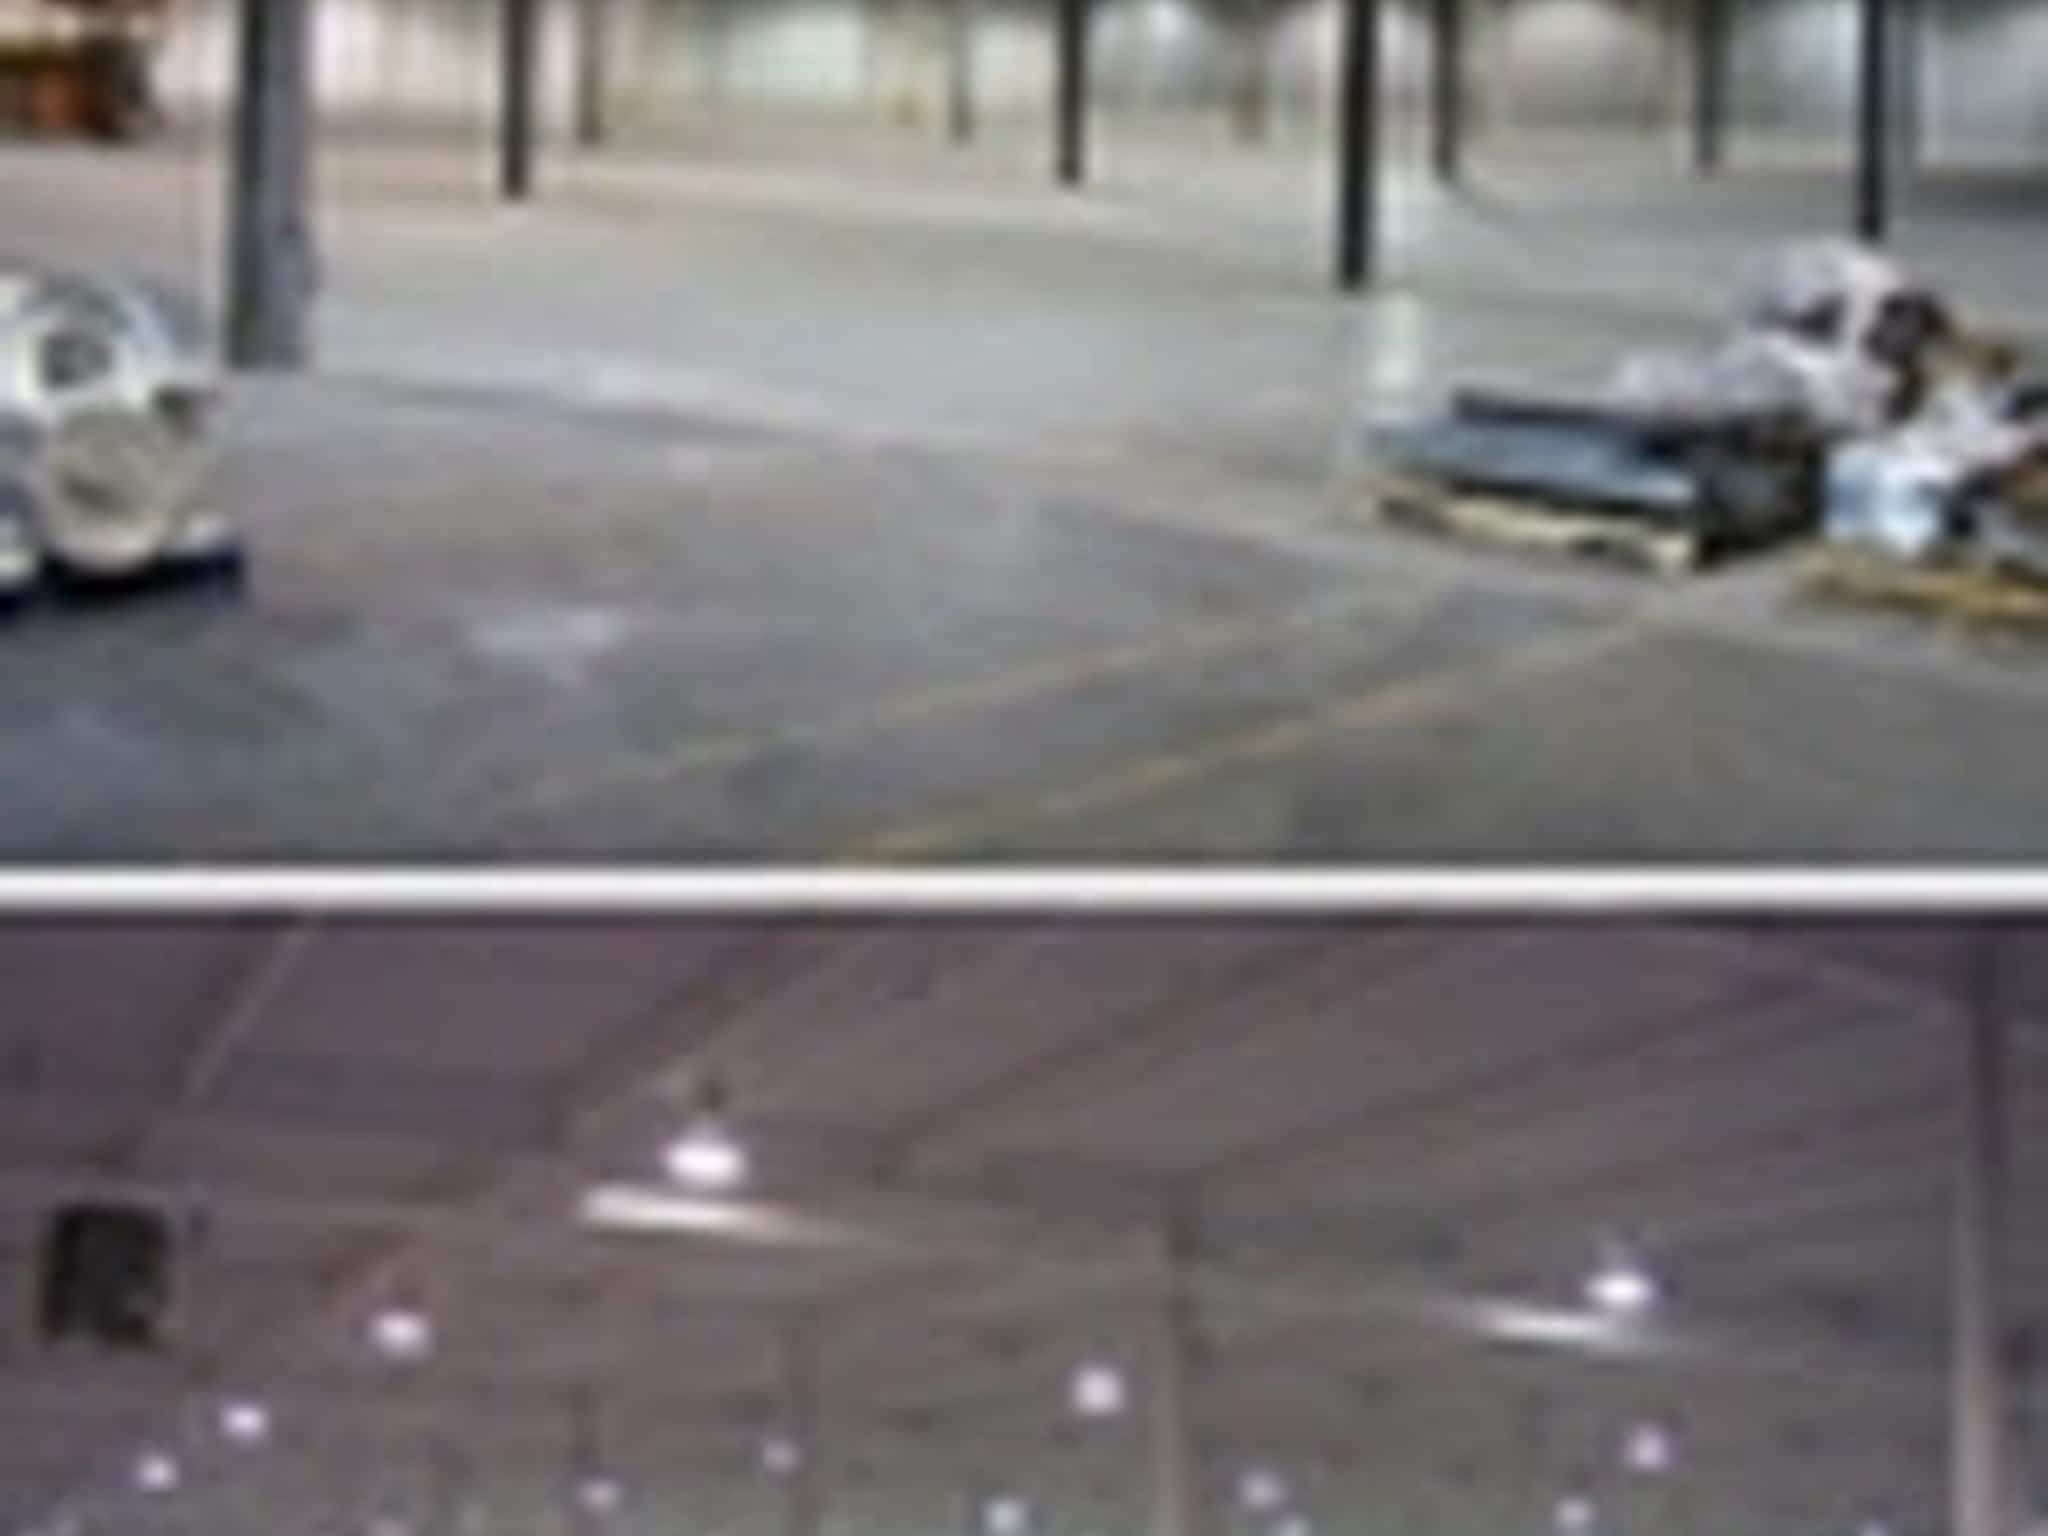 photo Toronto Industrial Painting - Commercial Painting Company, Coating Inspector